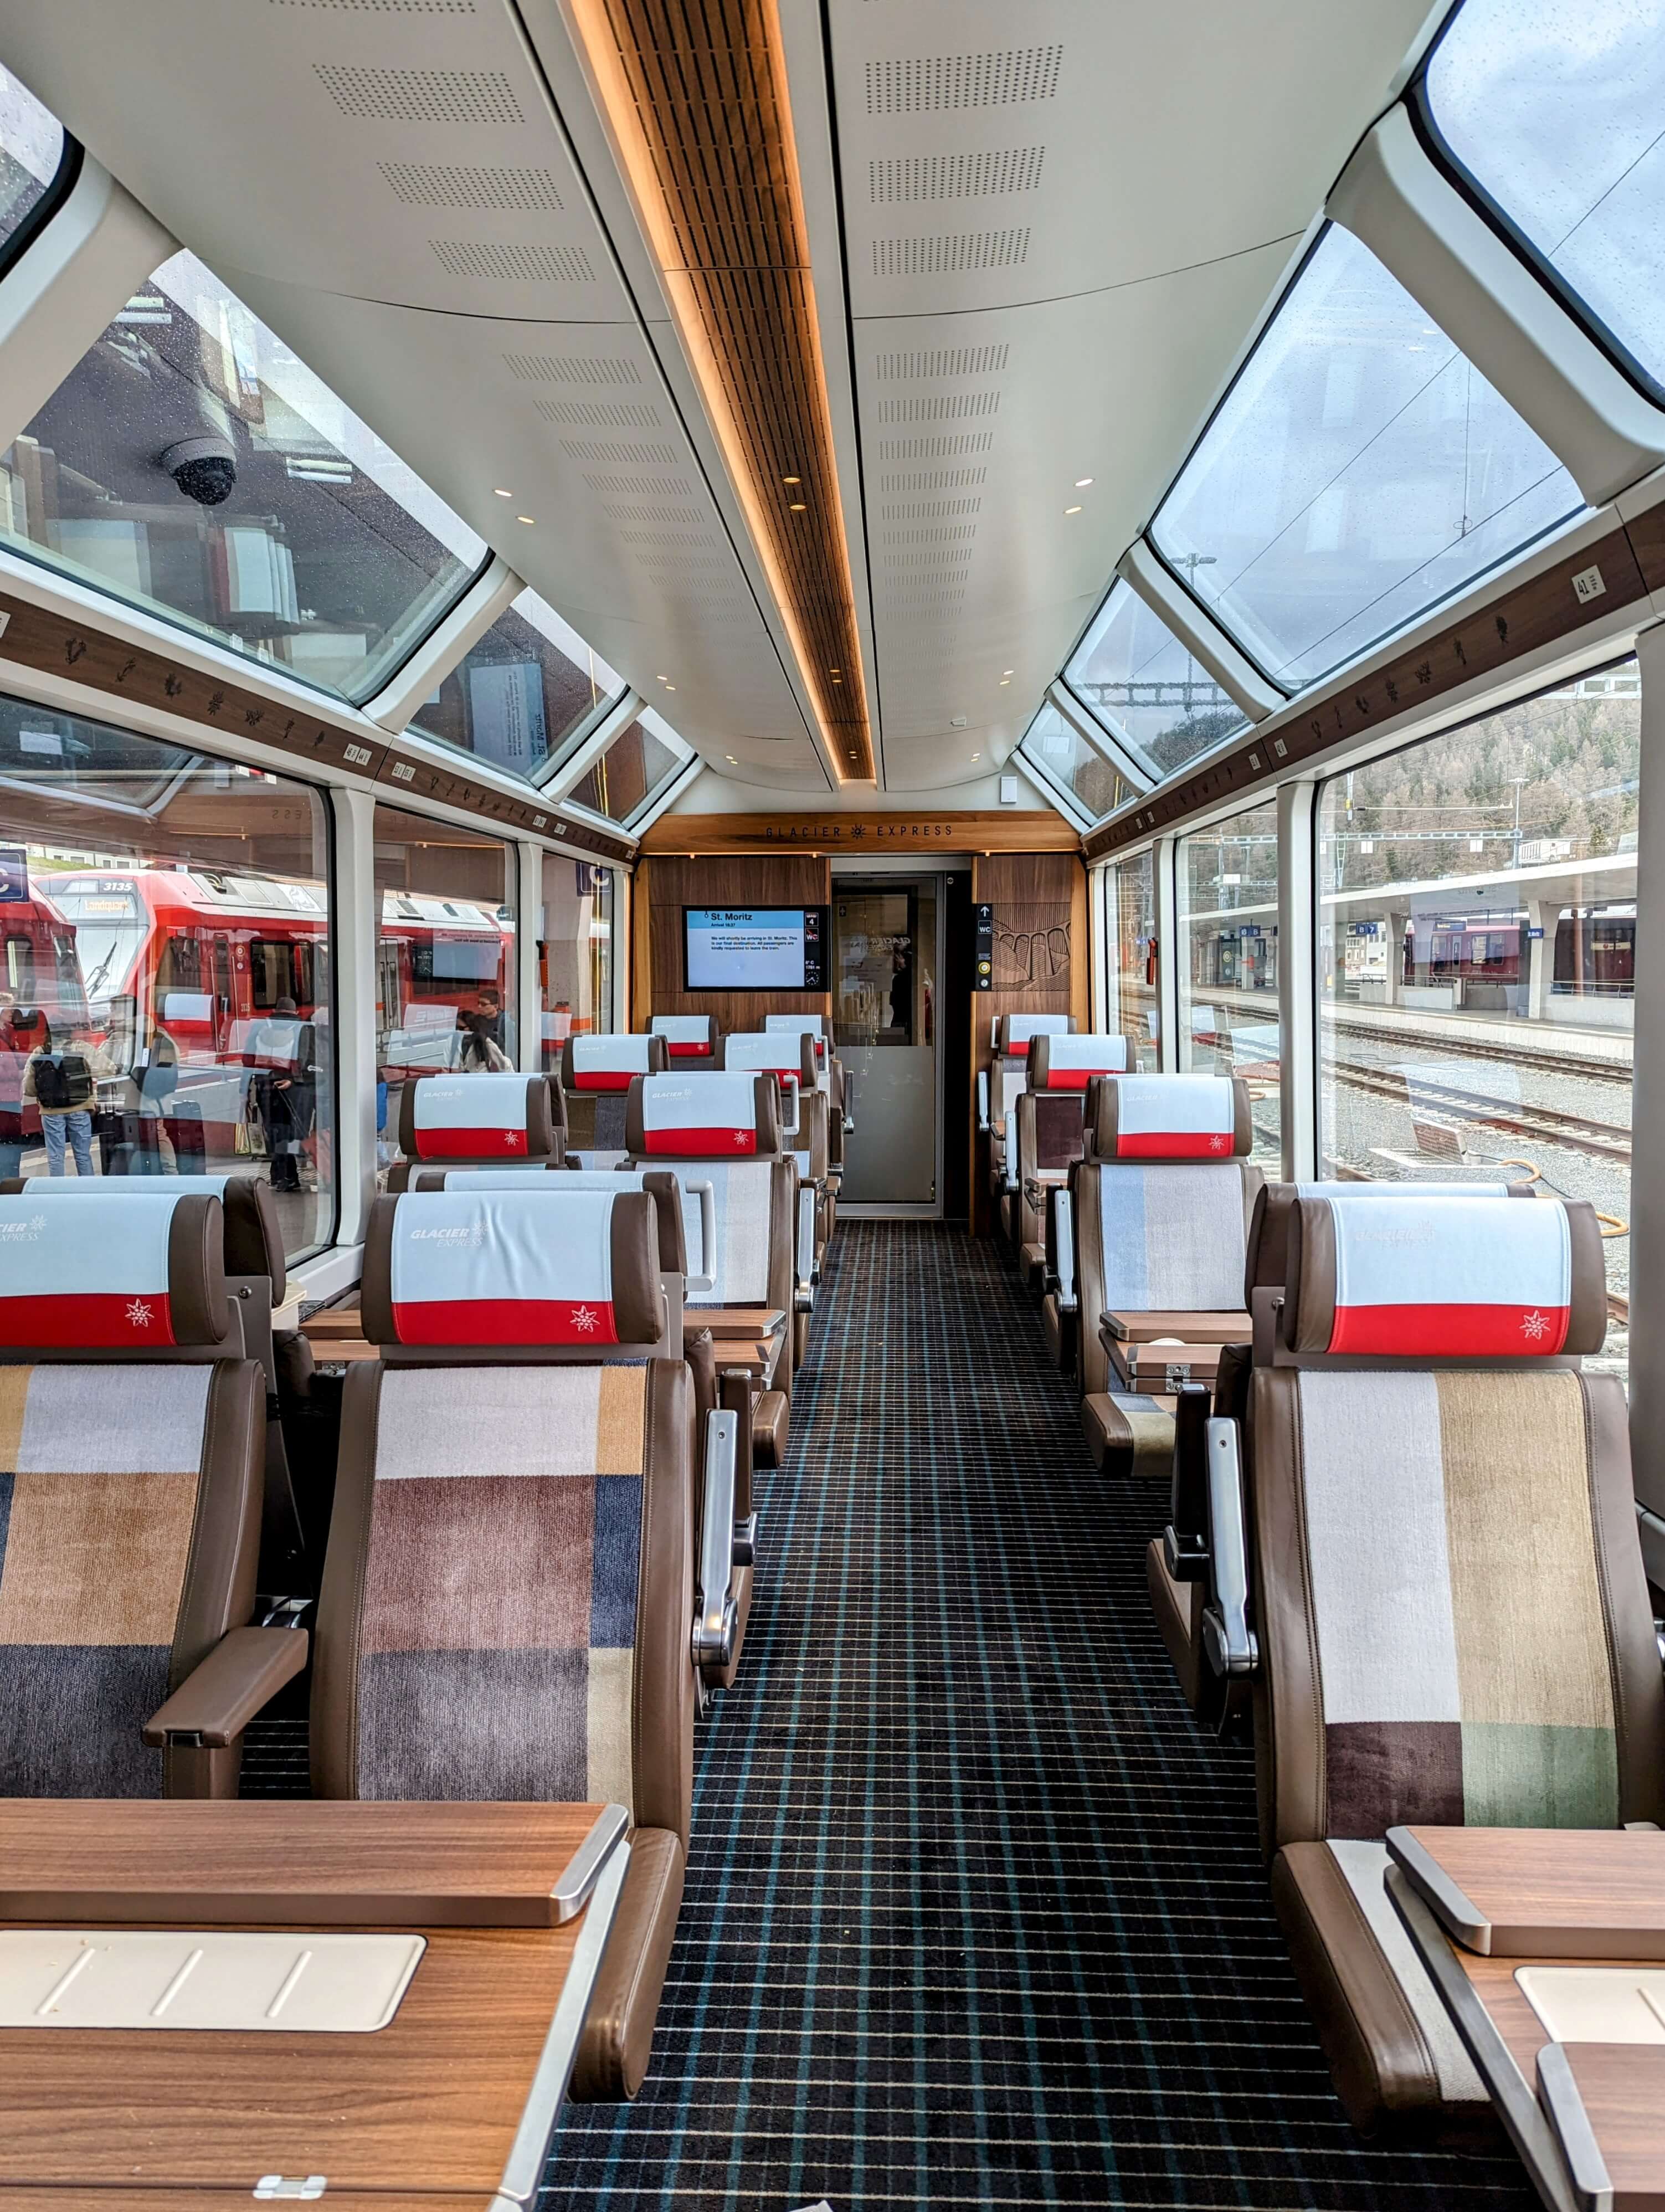 Inside of the Glacier Express train